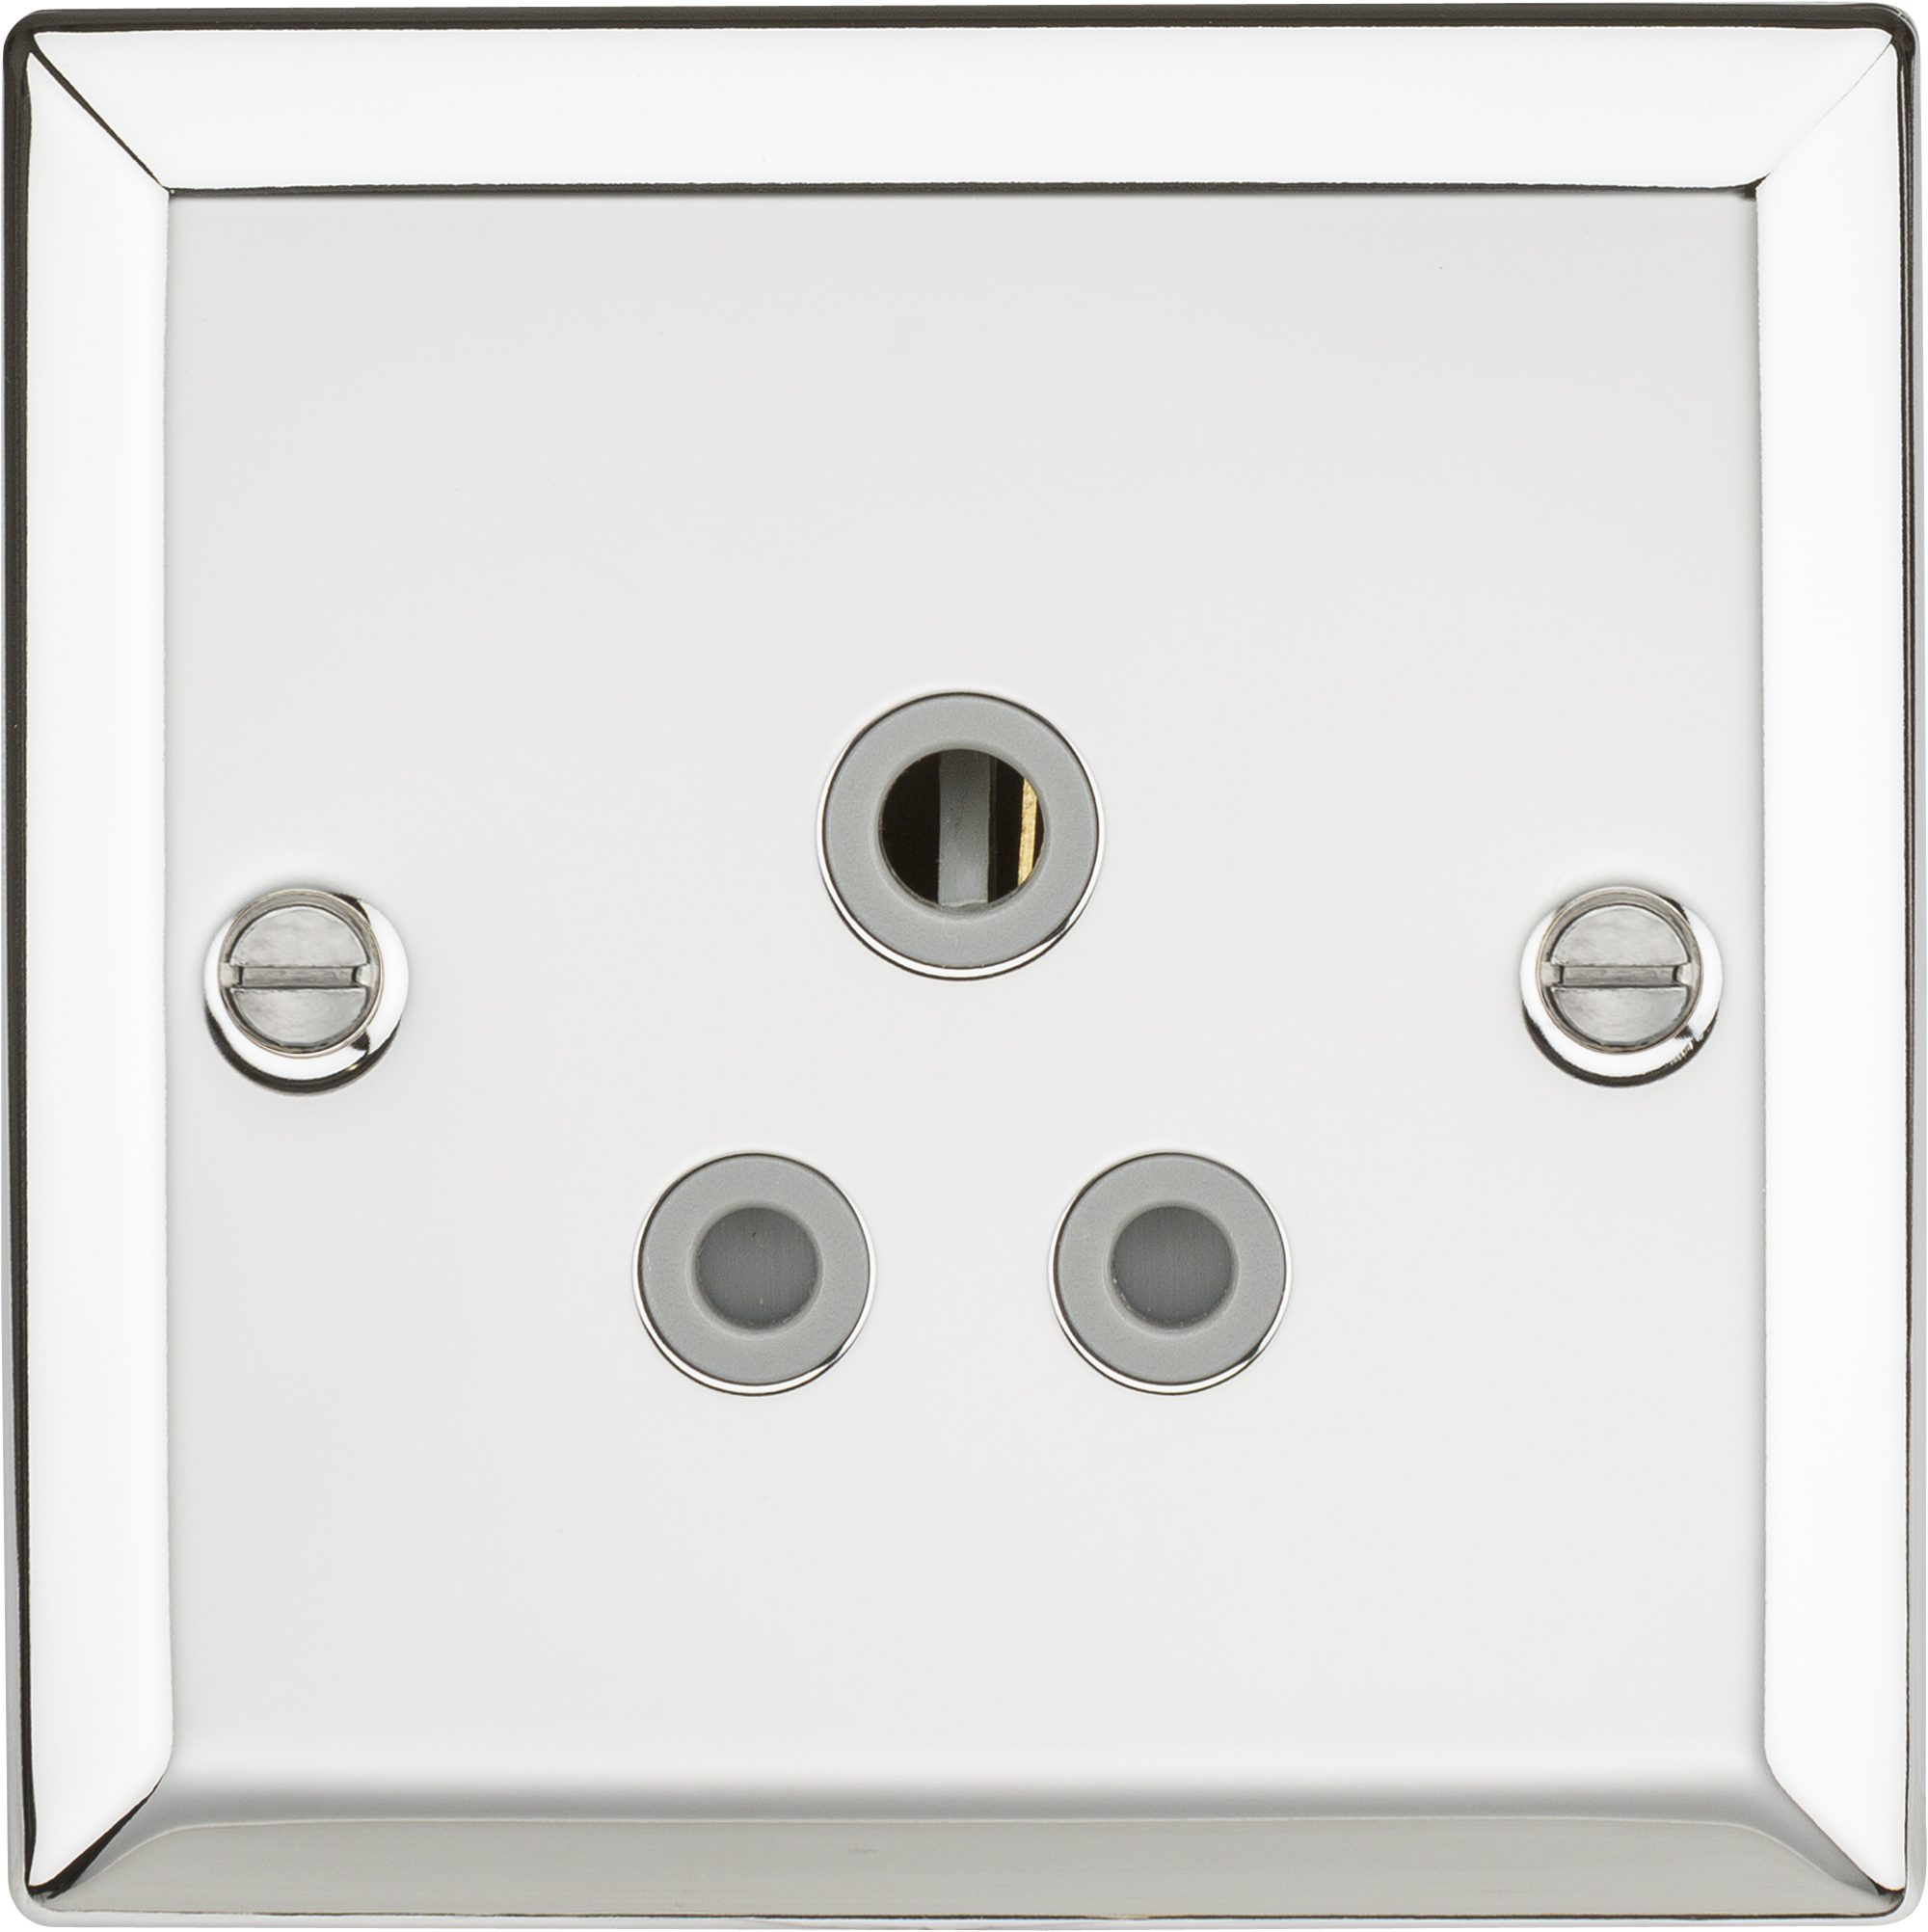 5A Unswitched Socket With Grey Insert - Bevelled Edge Polished Chrome - CV5APCG 